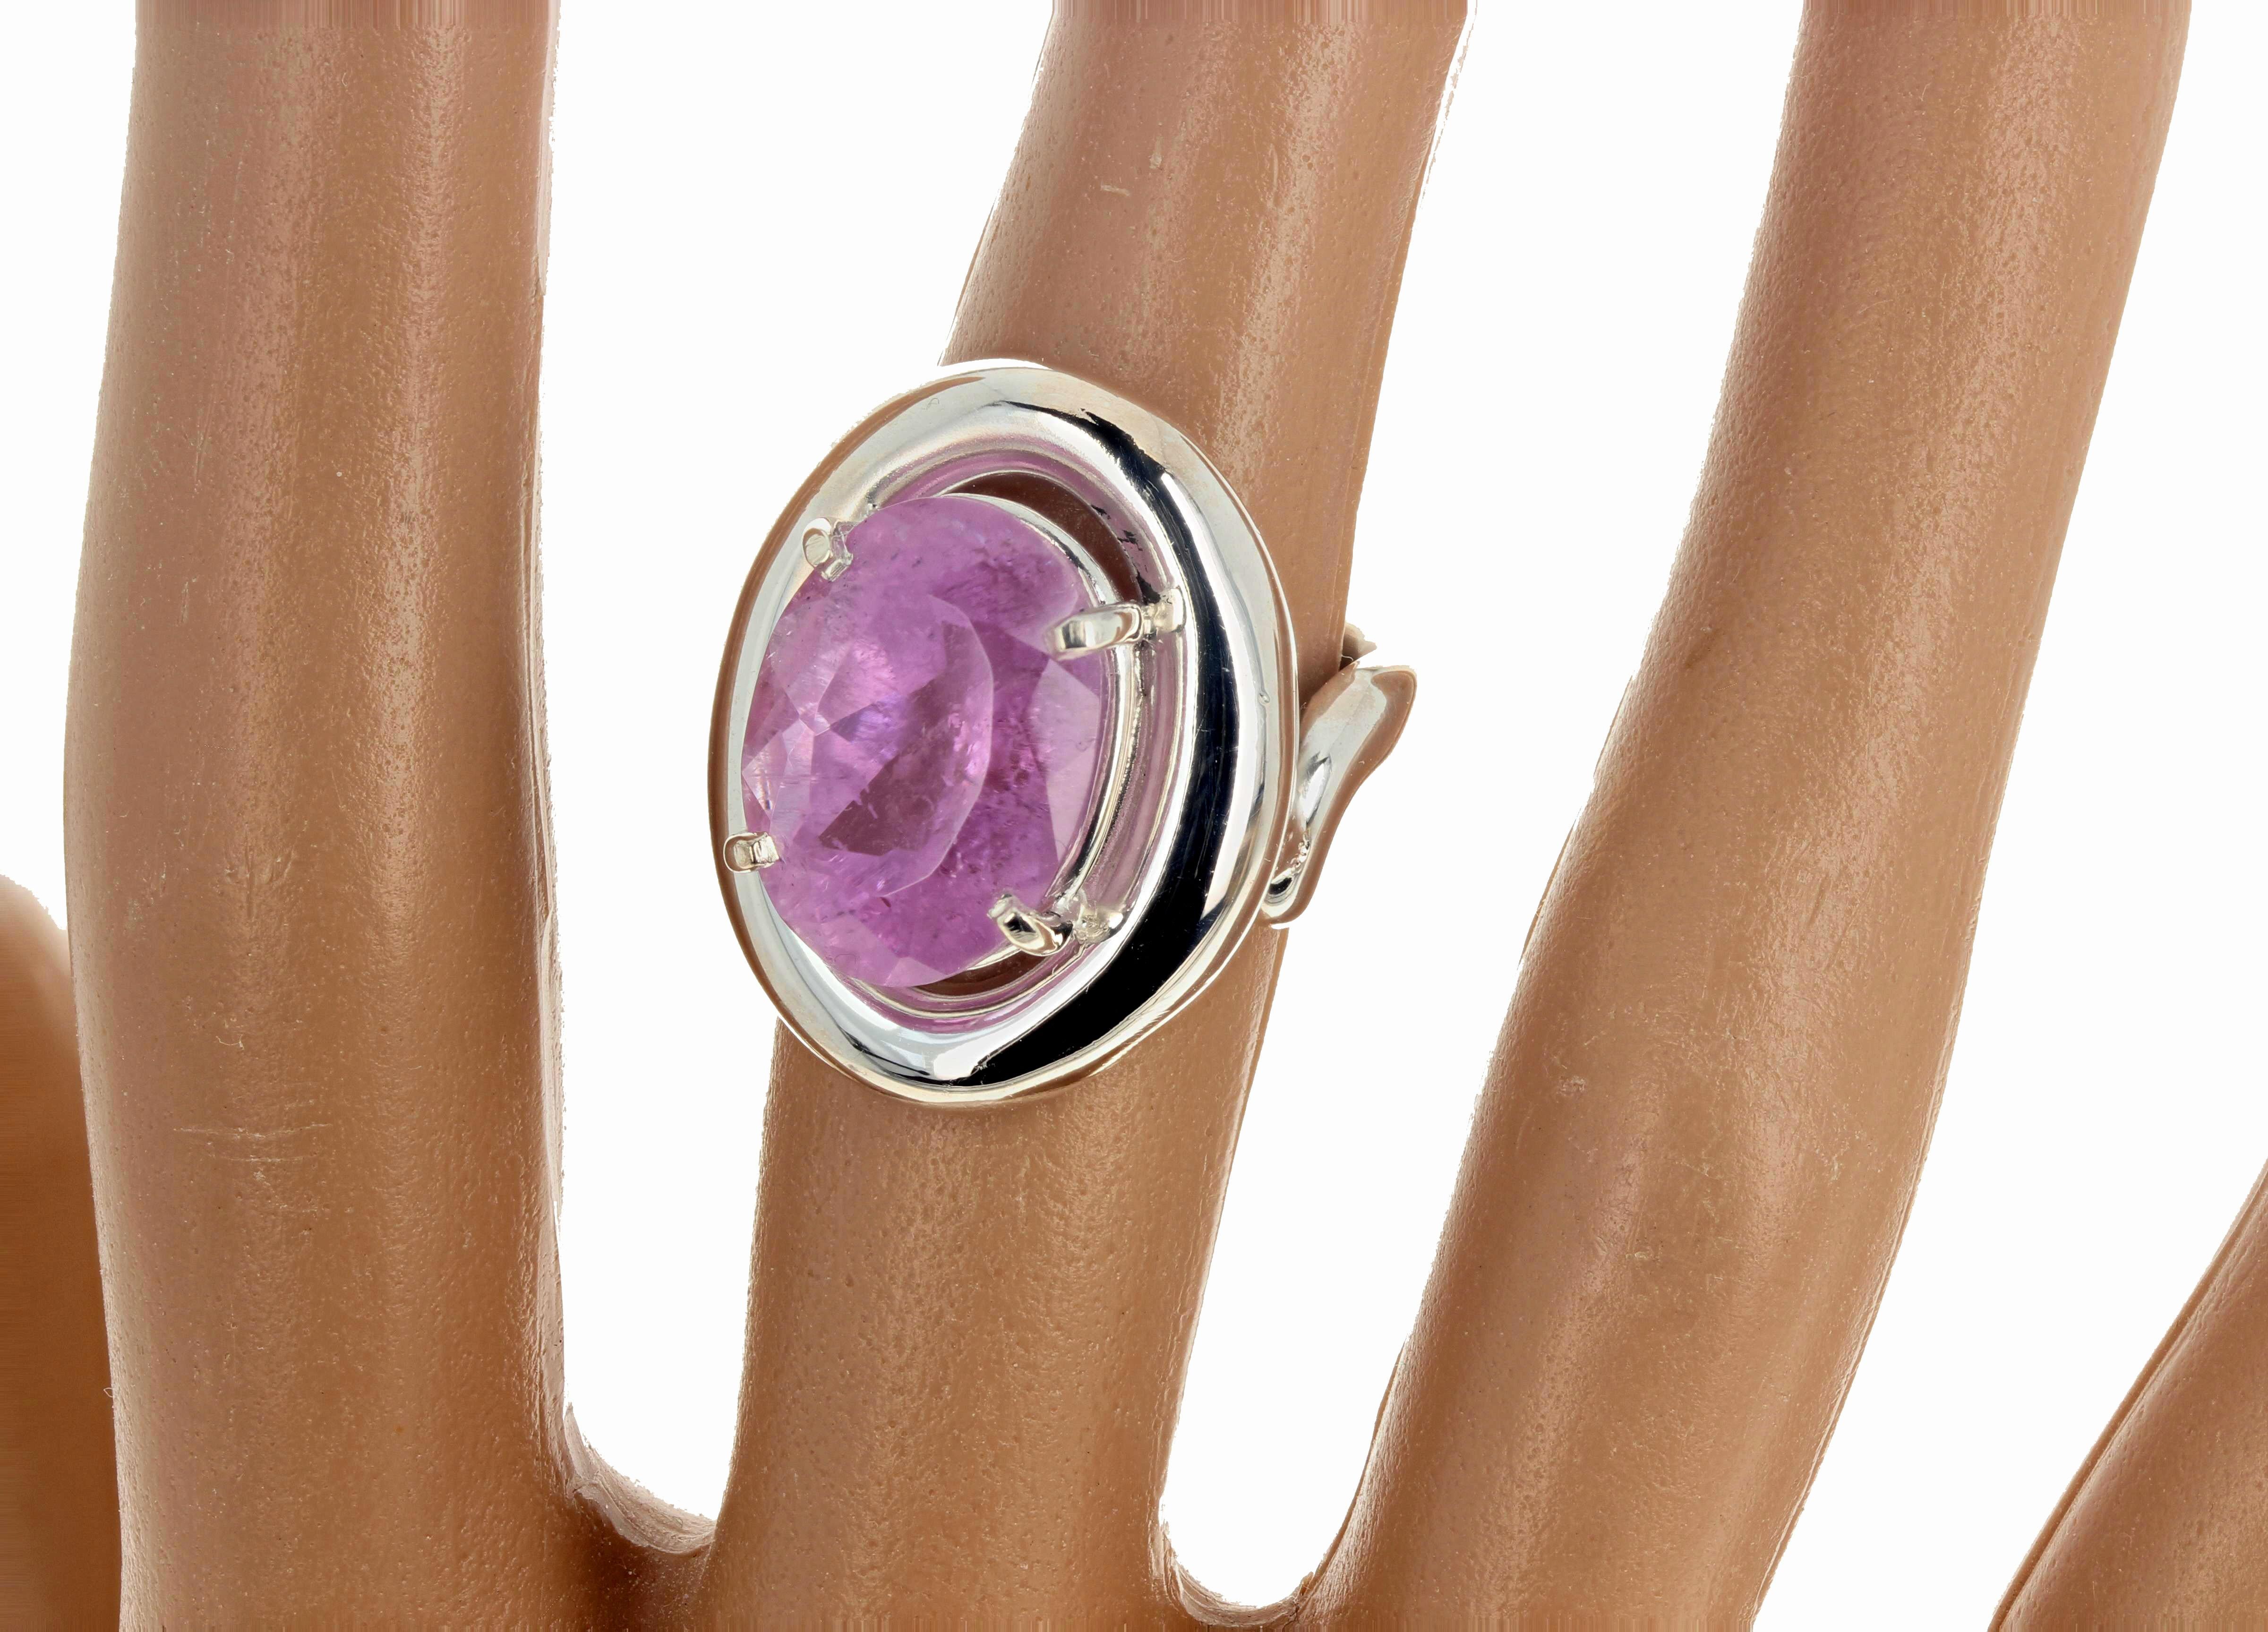 AJD Intensely Pink Natural 9.76 Ct. Kunzite Dramatic Sterling Silver Ring For Sale 1